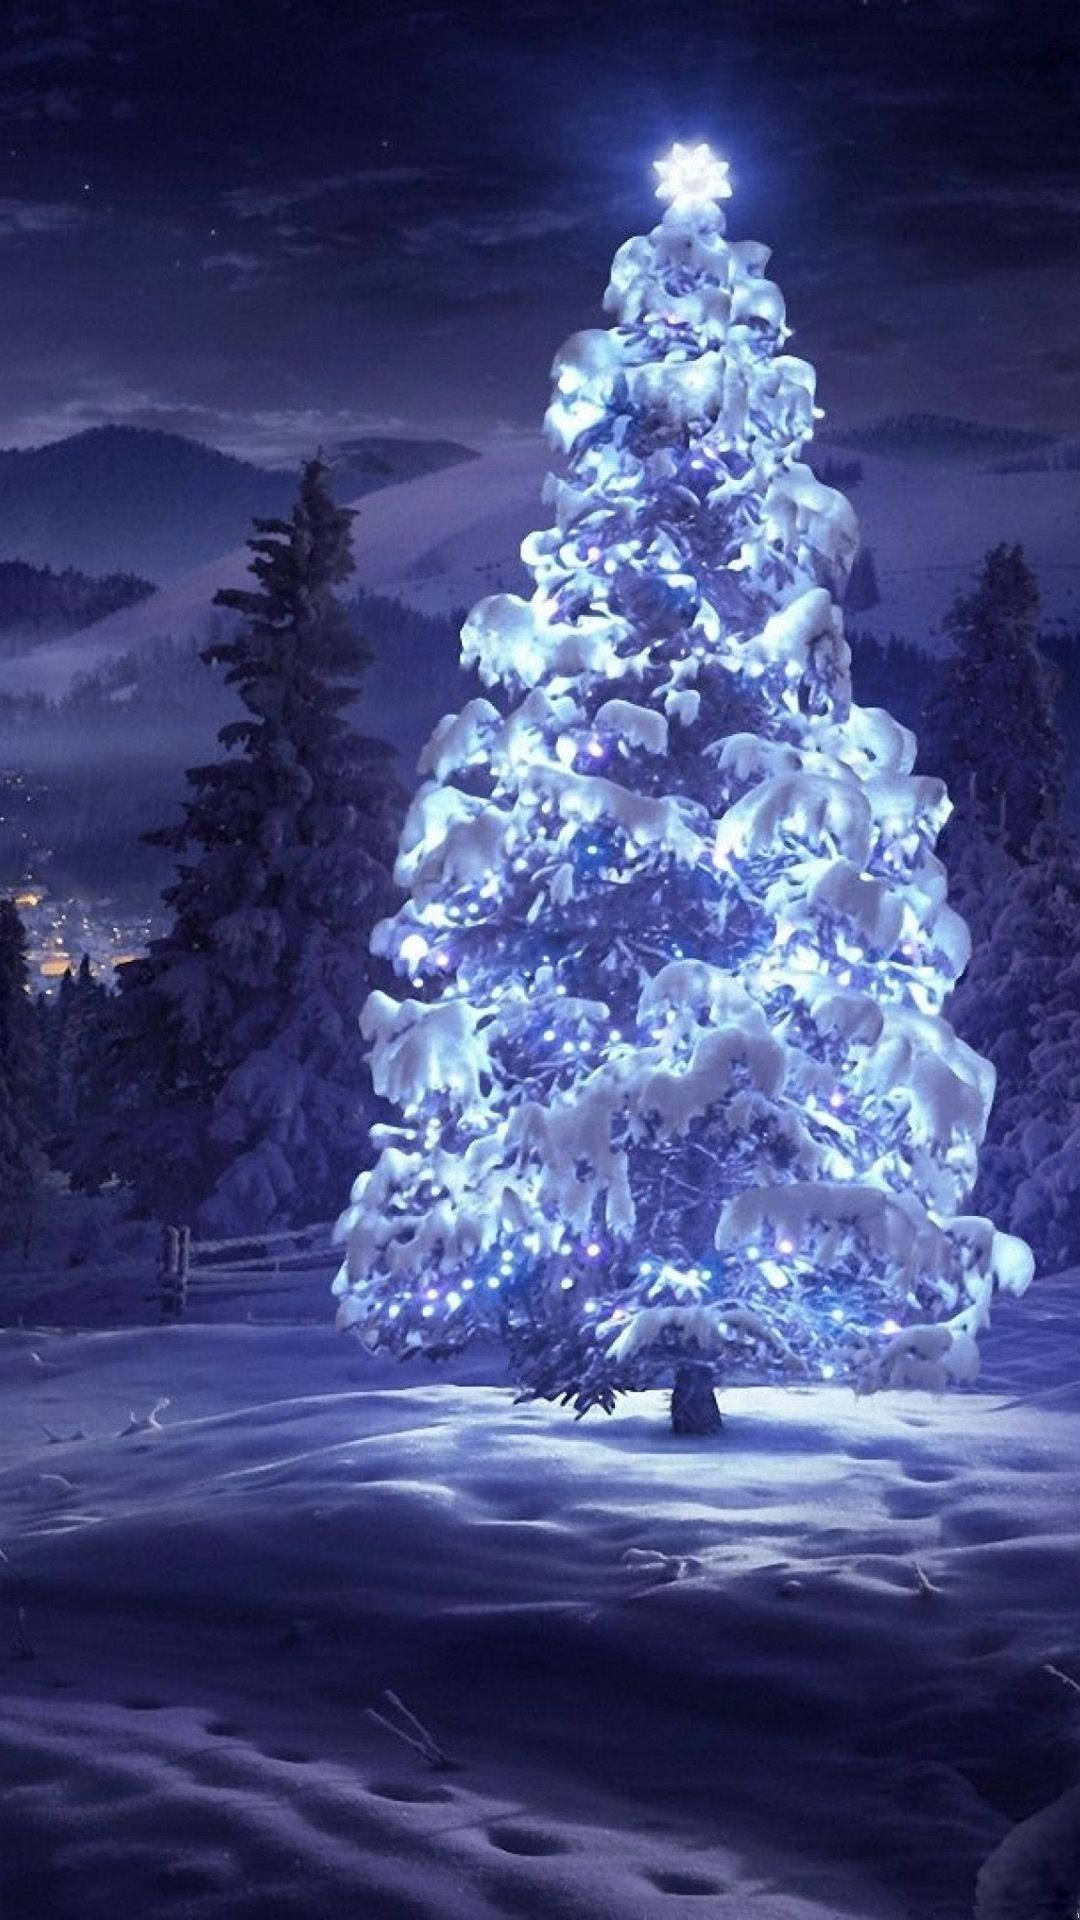 Bright blue Christmas tree against a snowy backdrop Wallpaper